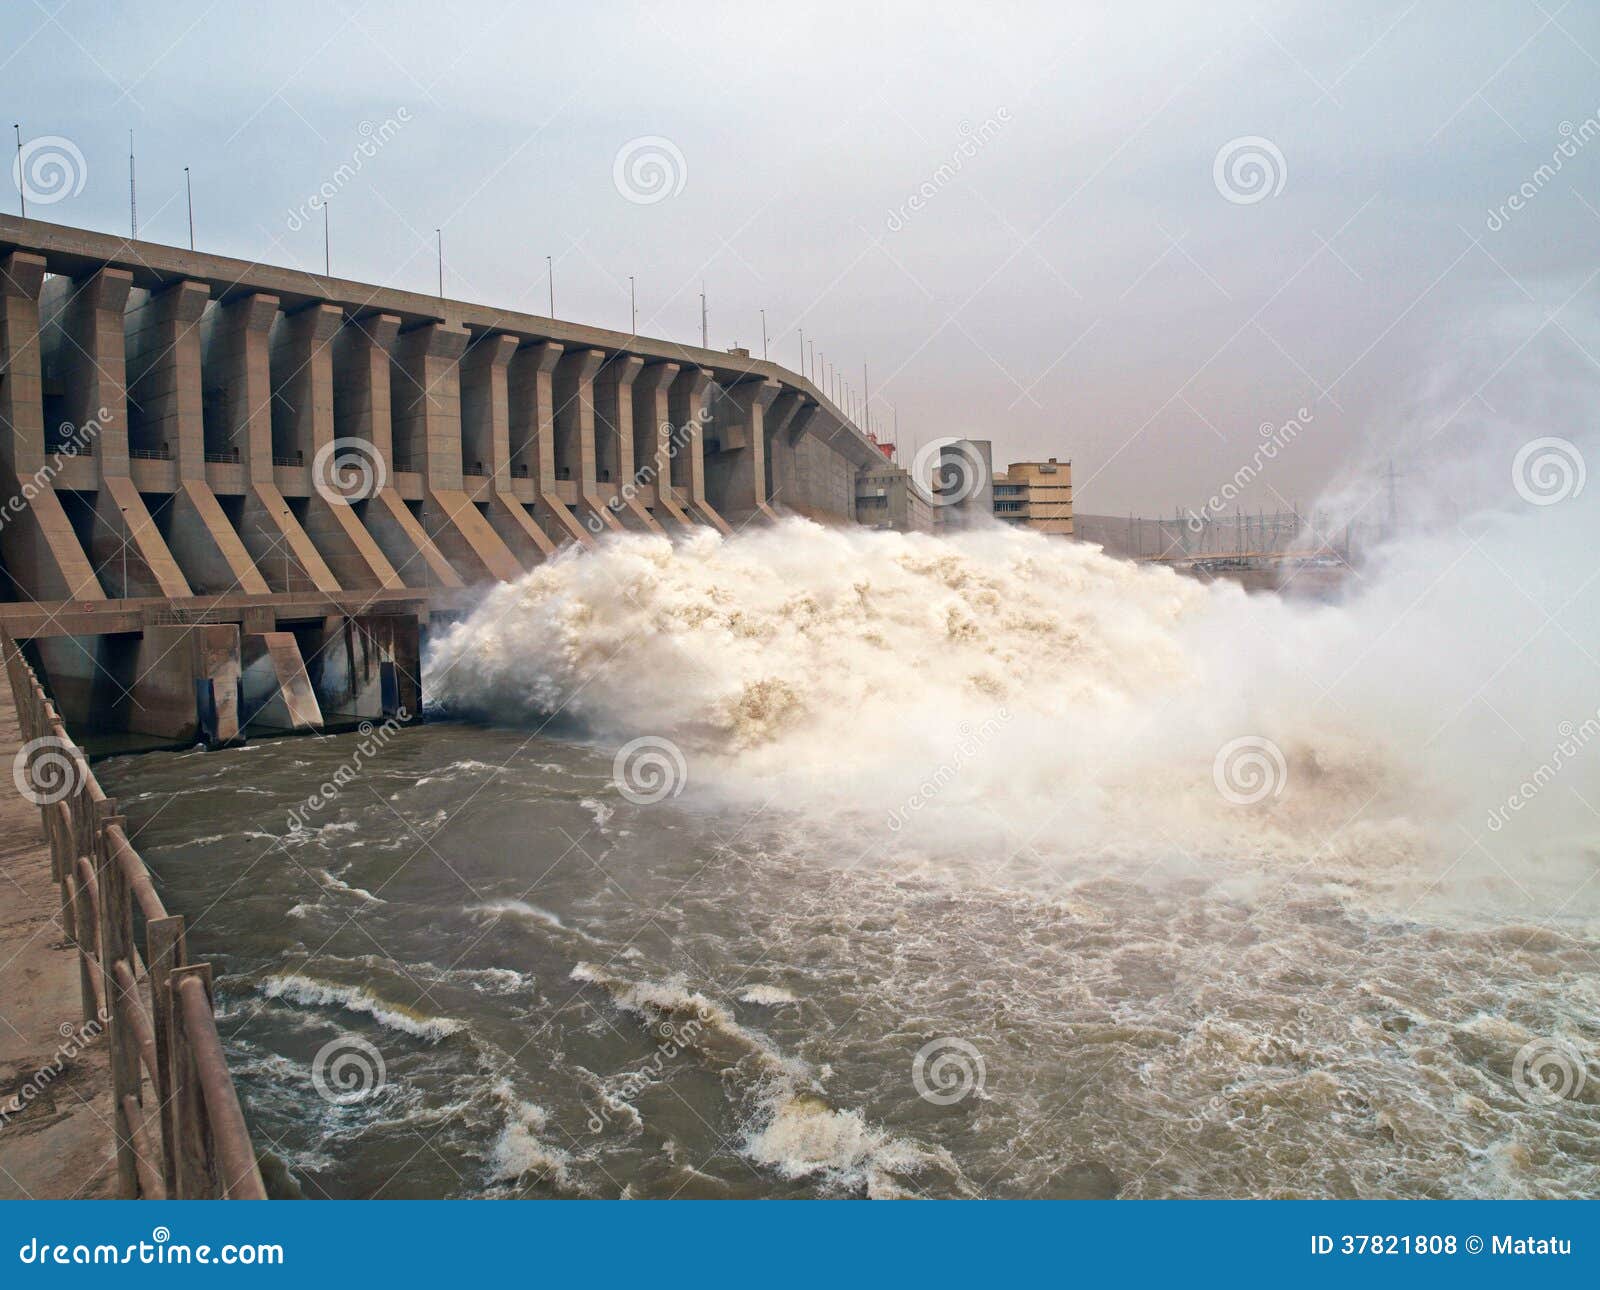 dam of the merowe hydroelectric power station